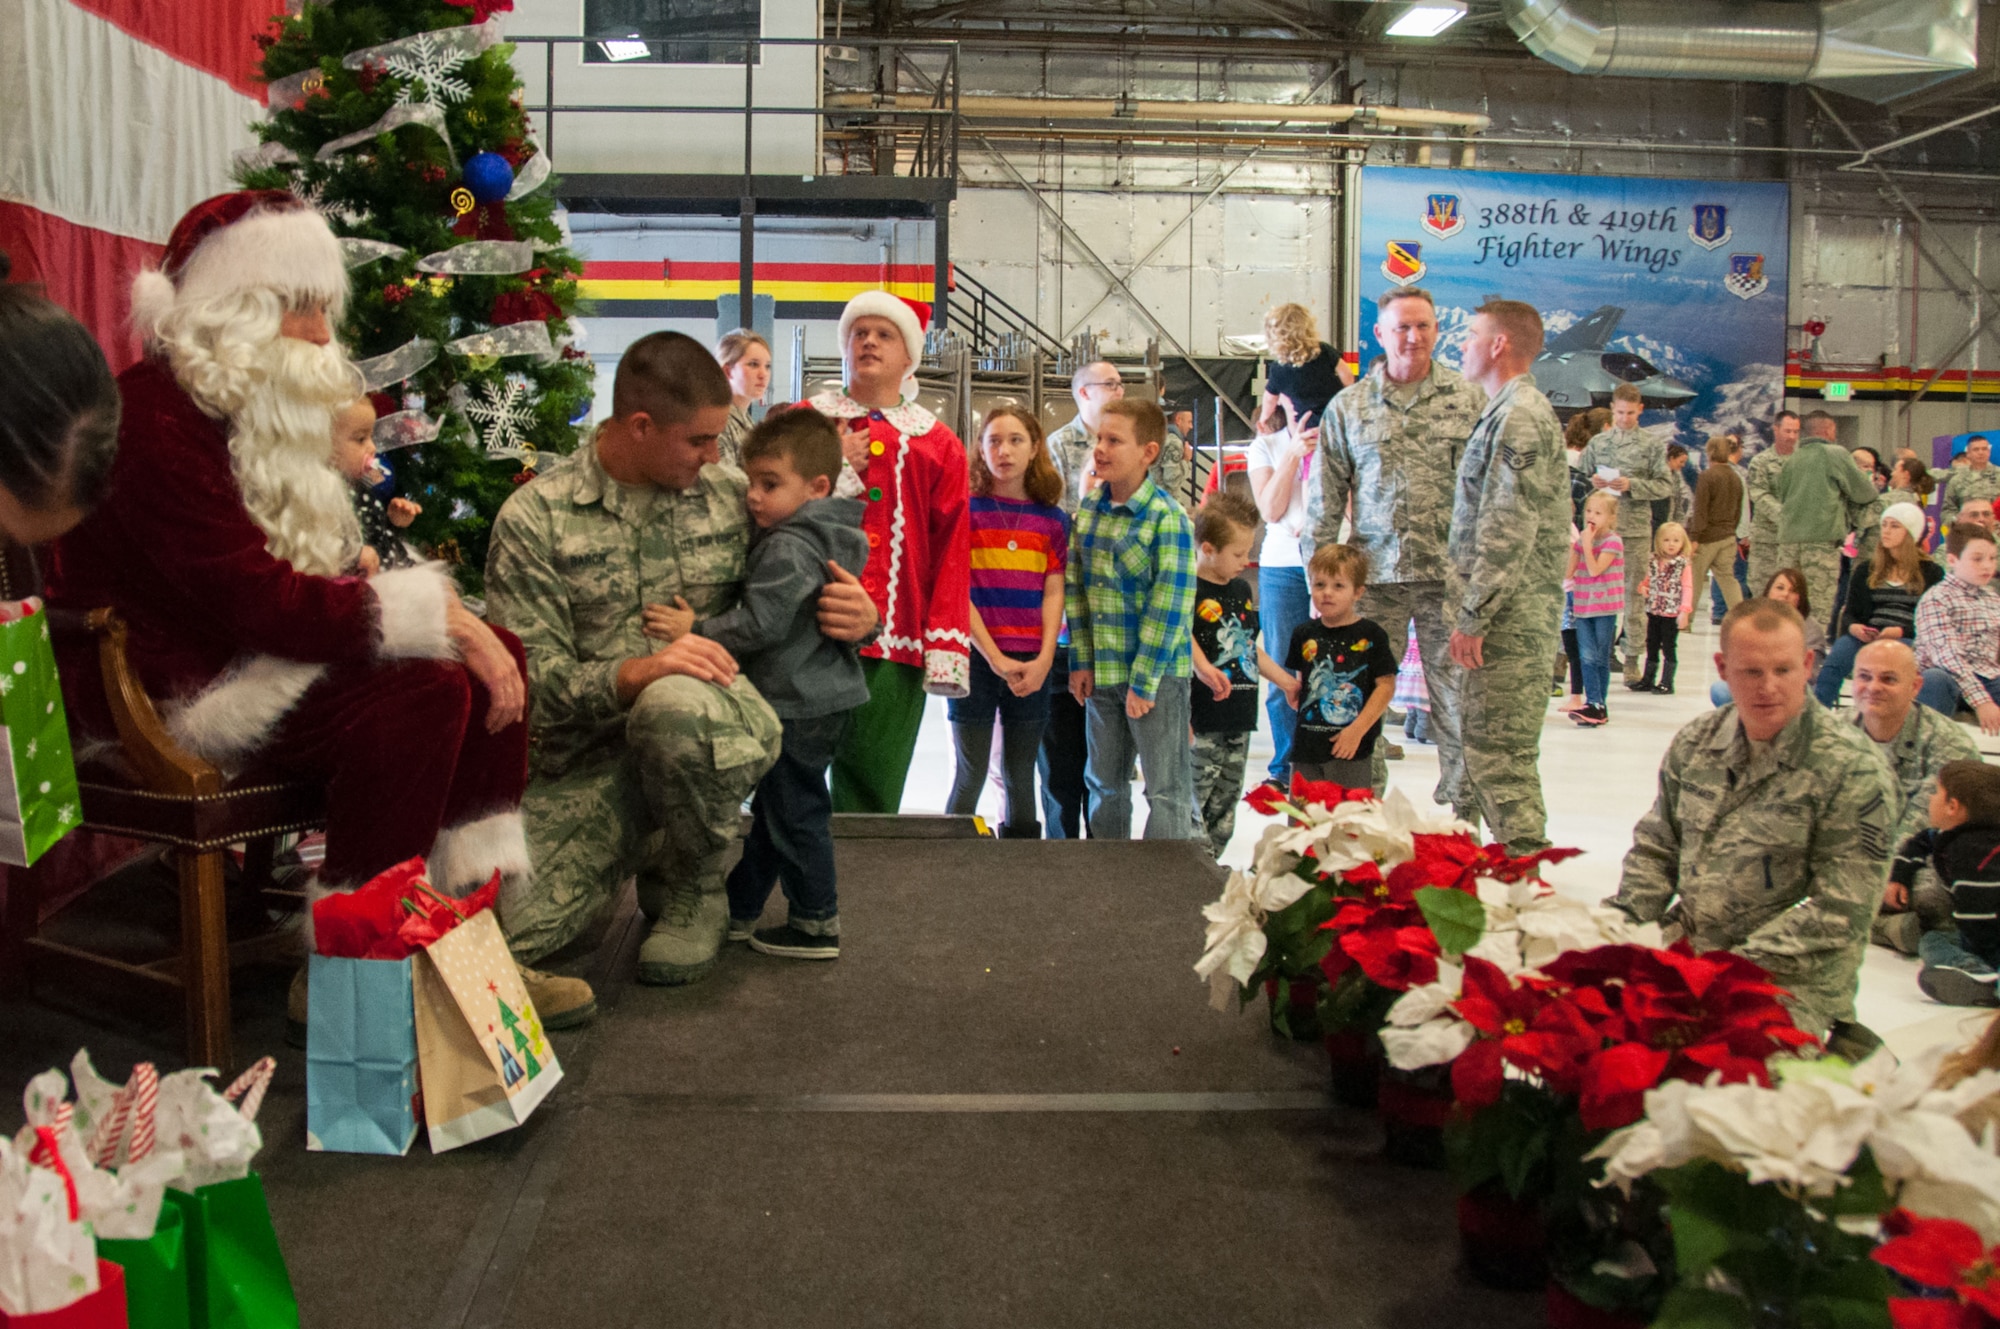 Children of 419th Fighter Wing Reservists line up to meet Santa Claus at a holiday party here today. About 300 kids were in attendance. Claus jetted in from the North Pole in an F-16 to pass out early Christmas gifts.